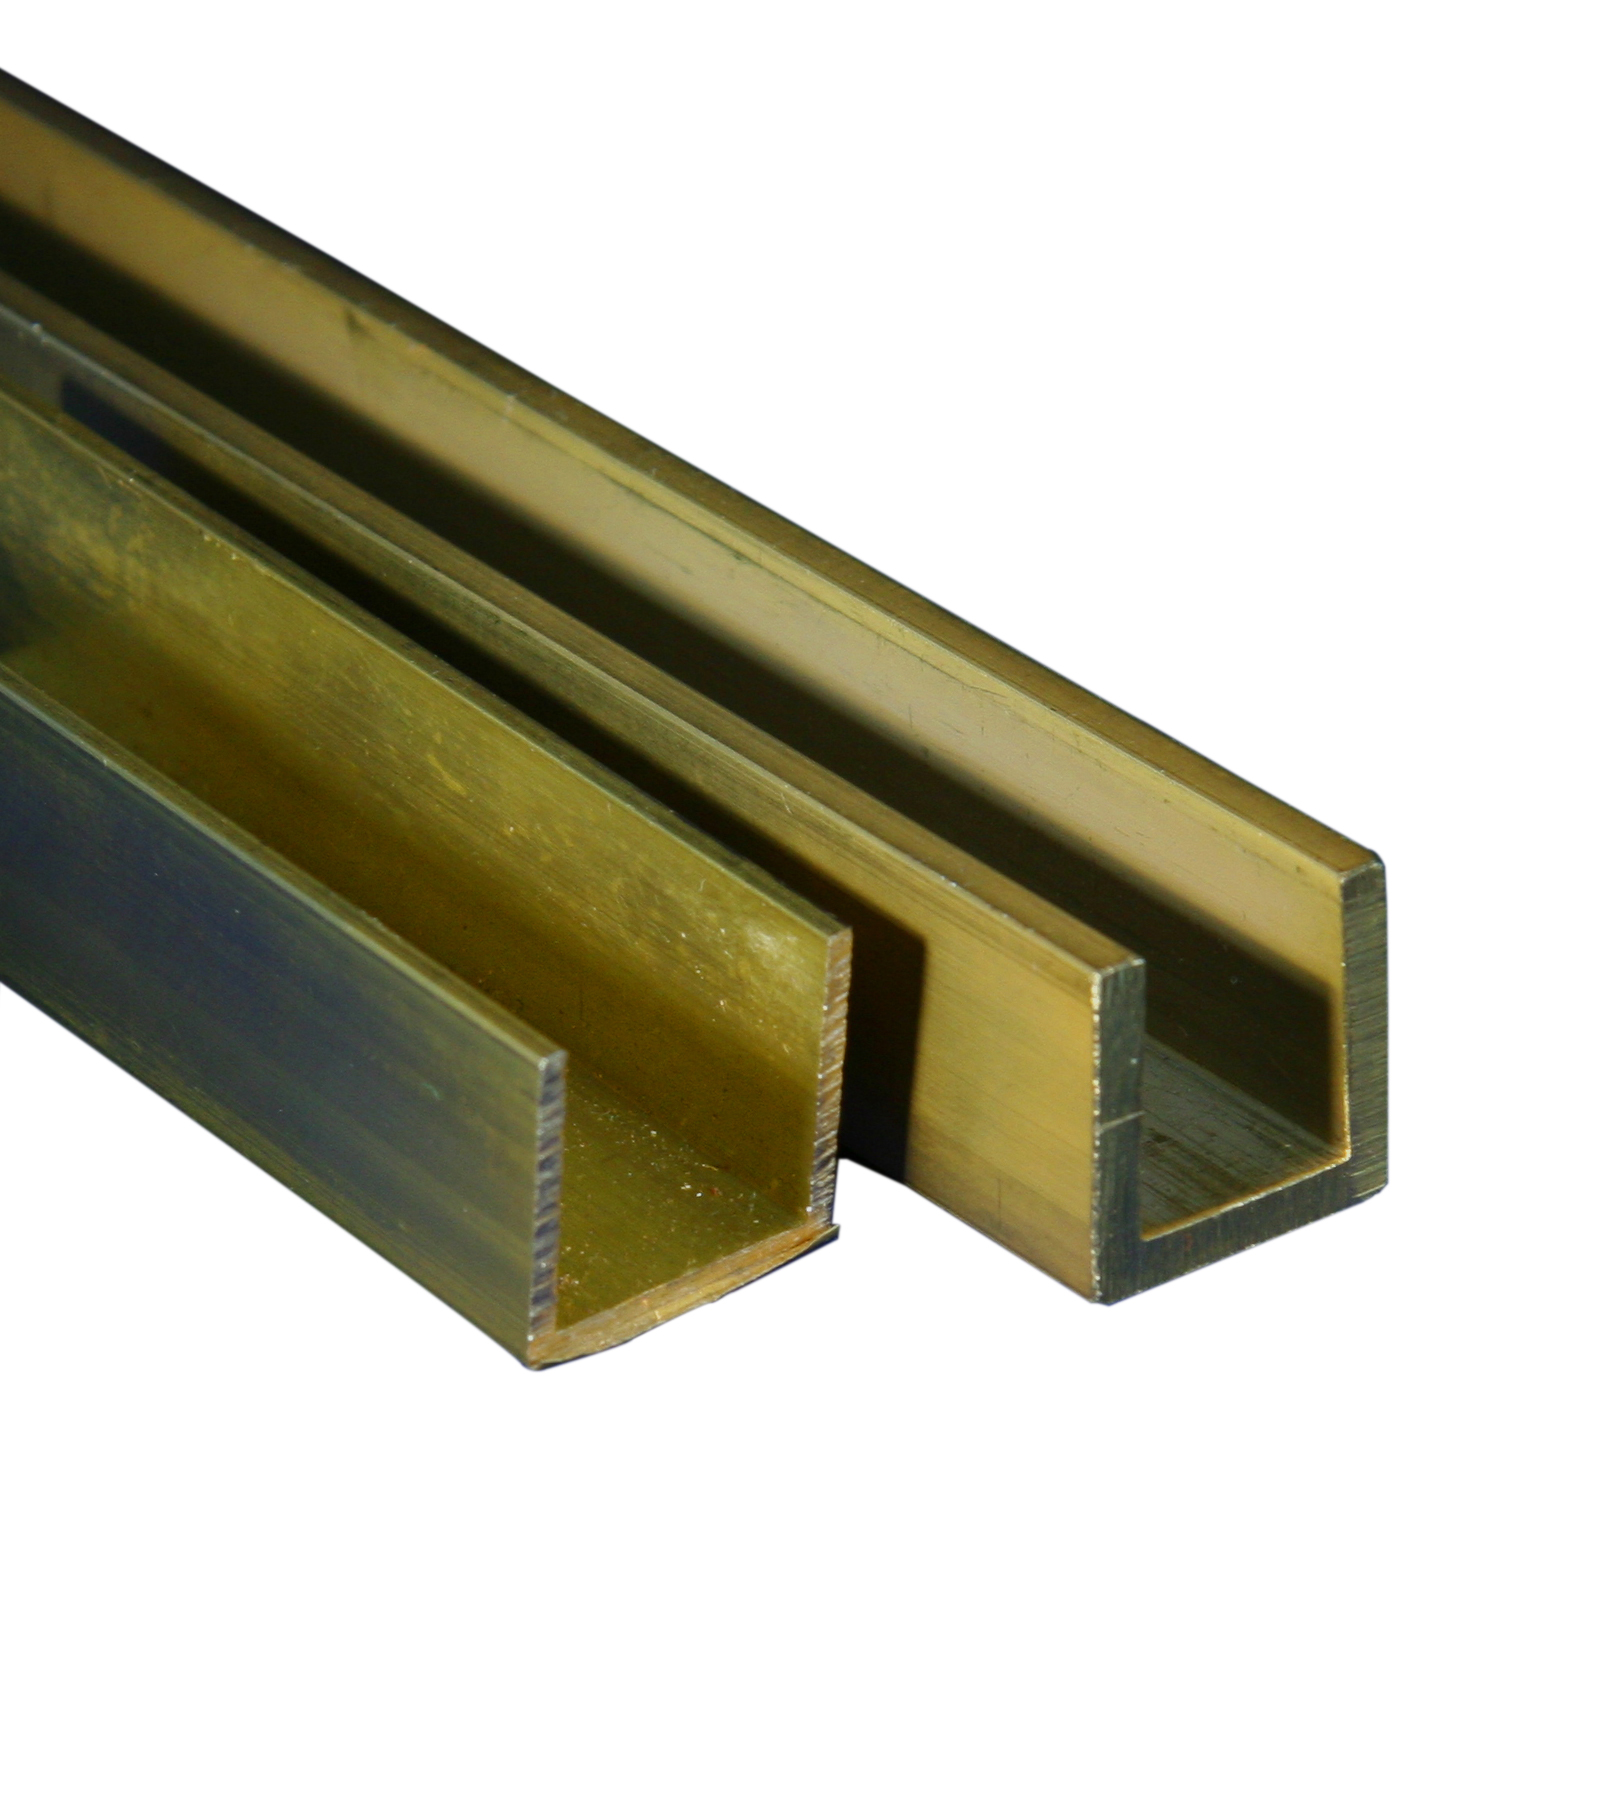 What is the difference between Brass and Bronze material and their use in  architectural grilles and metal work? - AAG2020, Brass 